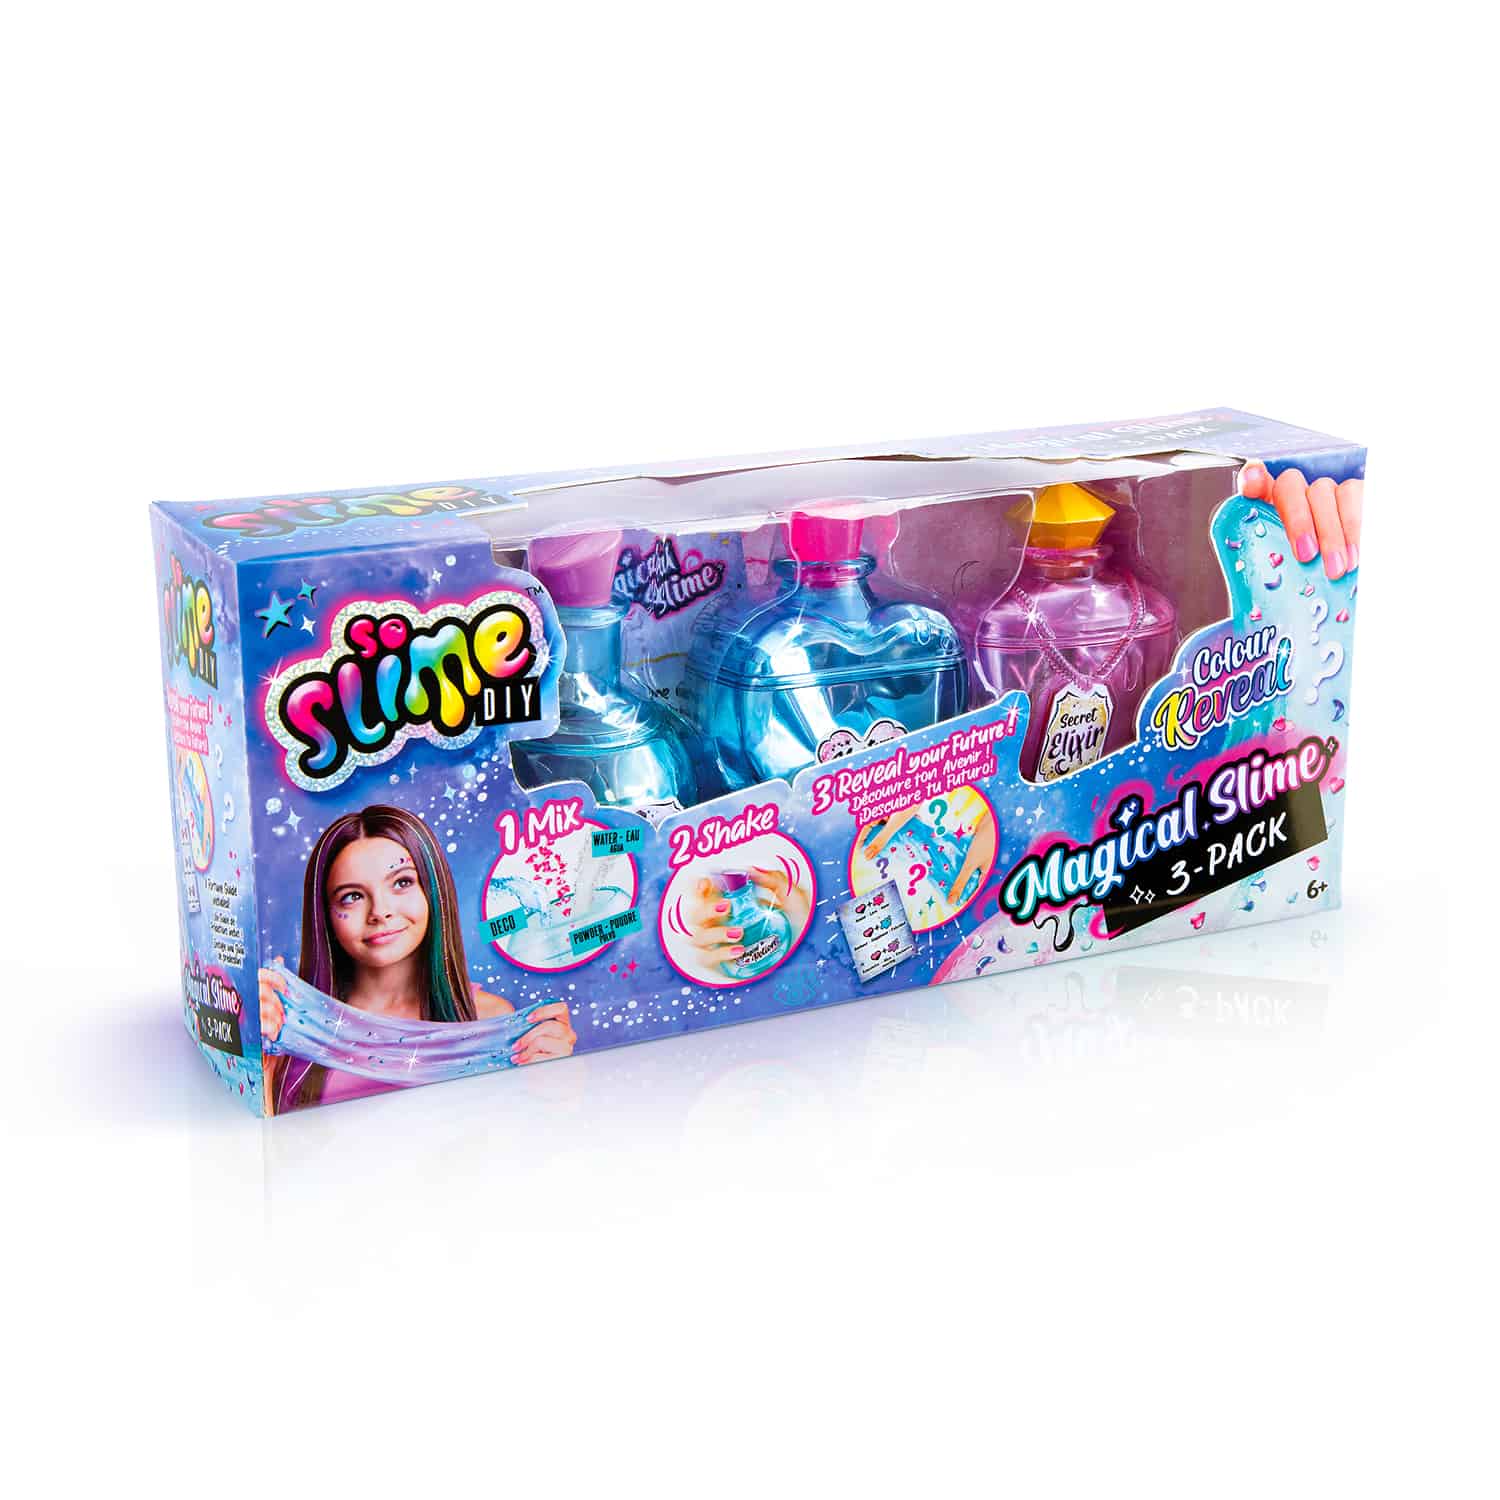 Canal Toys So Slime DIY Slime Shaker 3 Pack Glow